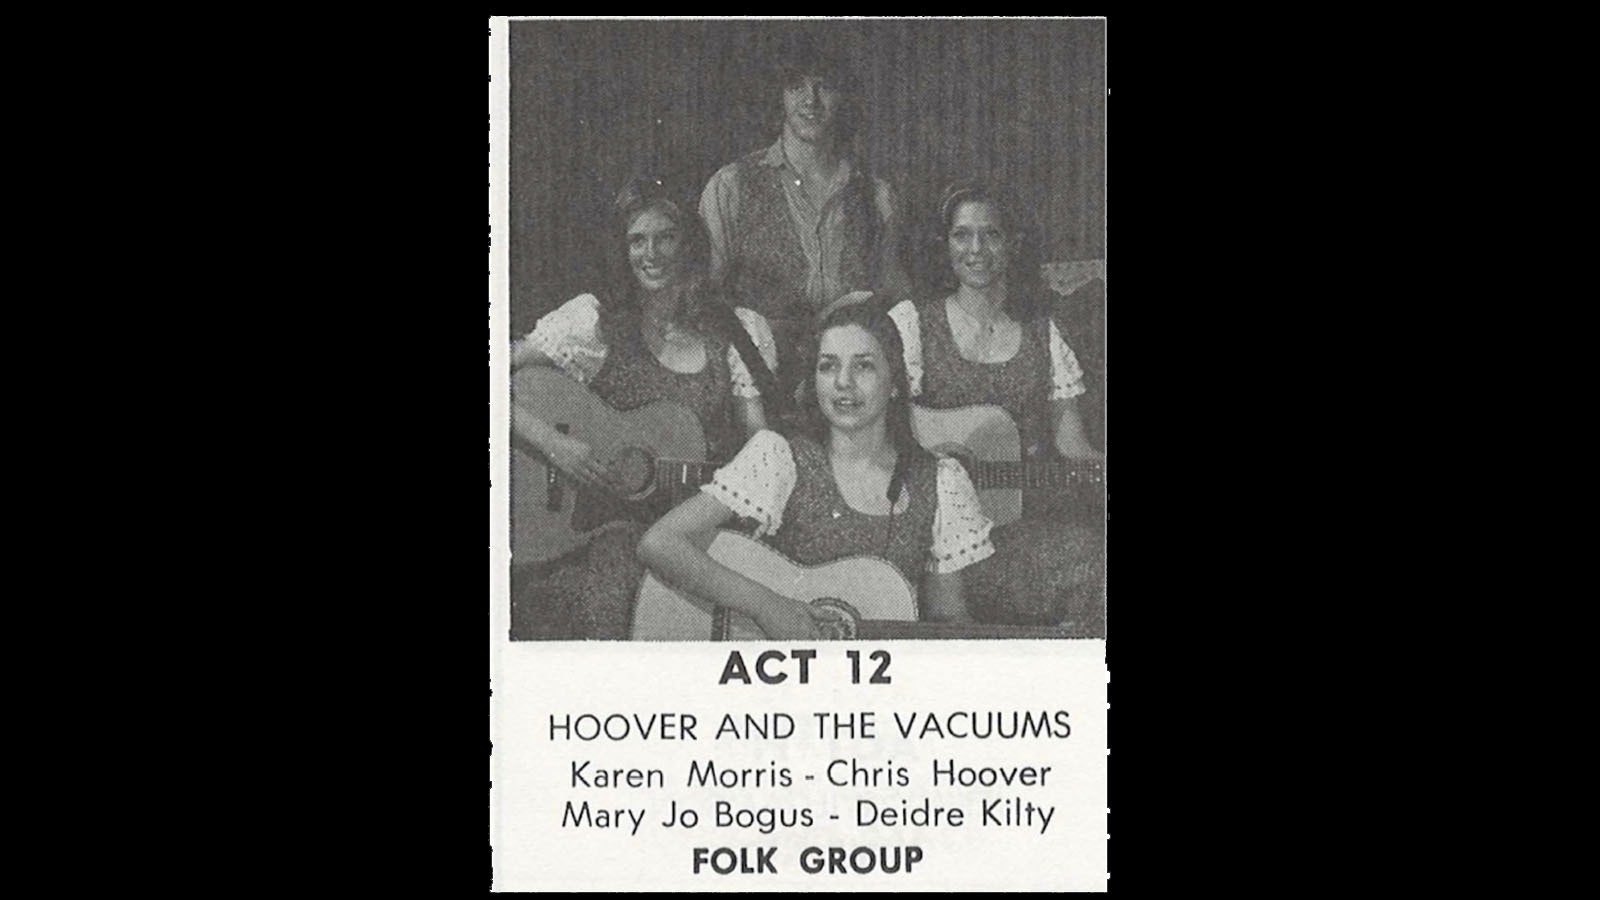 Chris Hoover and his band Hoover and the Vacuums won the Kiwanis Stars of Tomorrow contest in 1974.